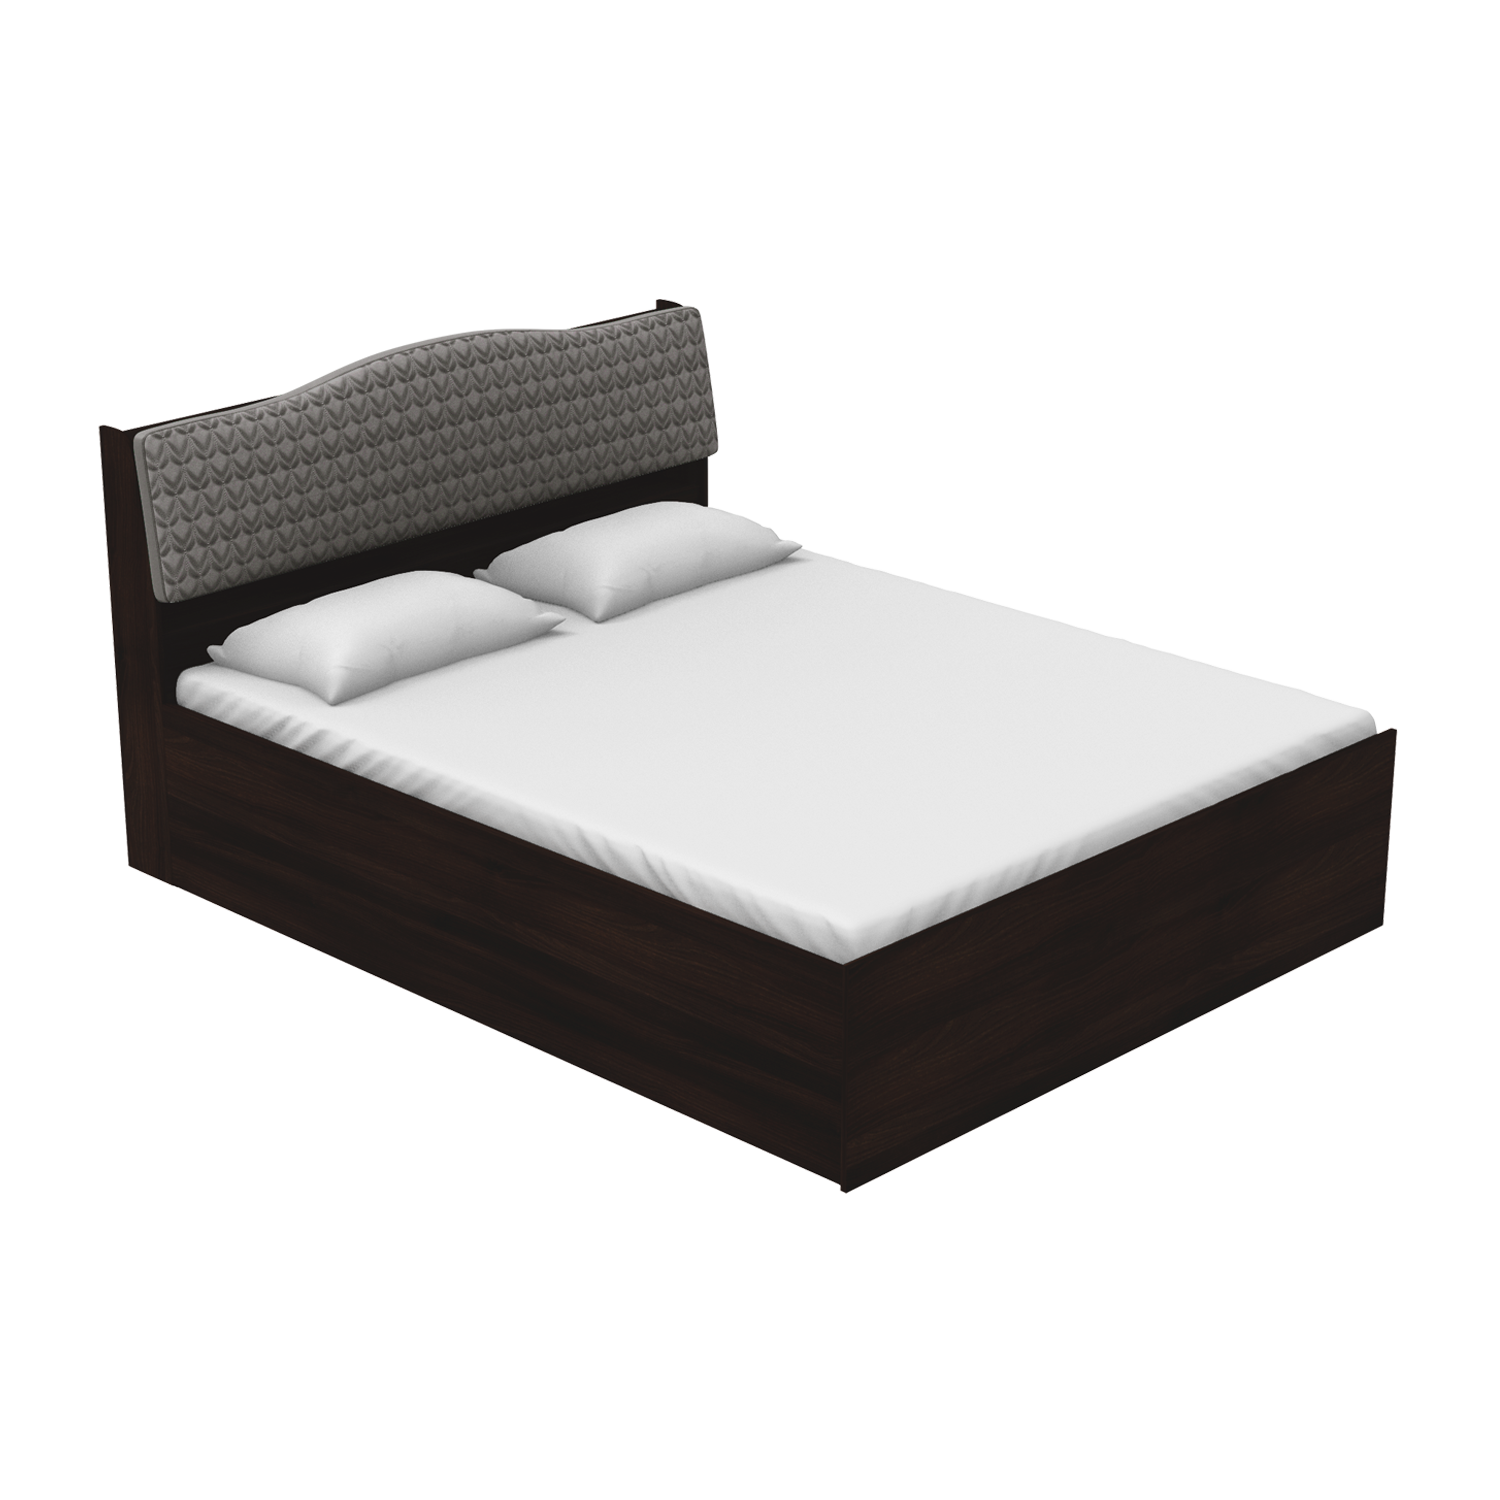 Sierra Queen Size Bed With Storage, Queen Size Bed With Cushioned Headboard